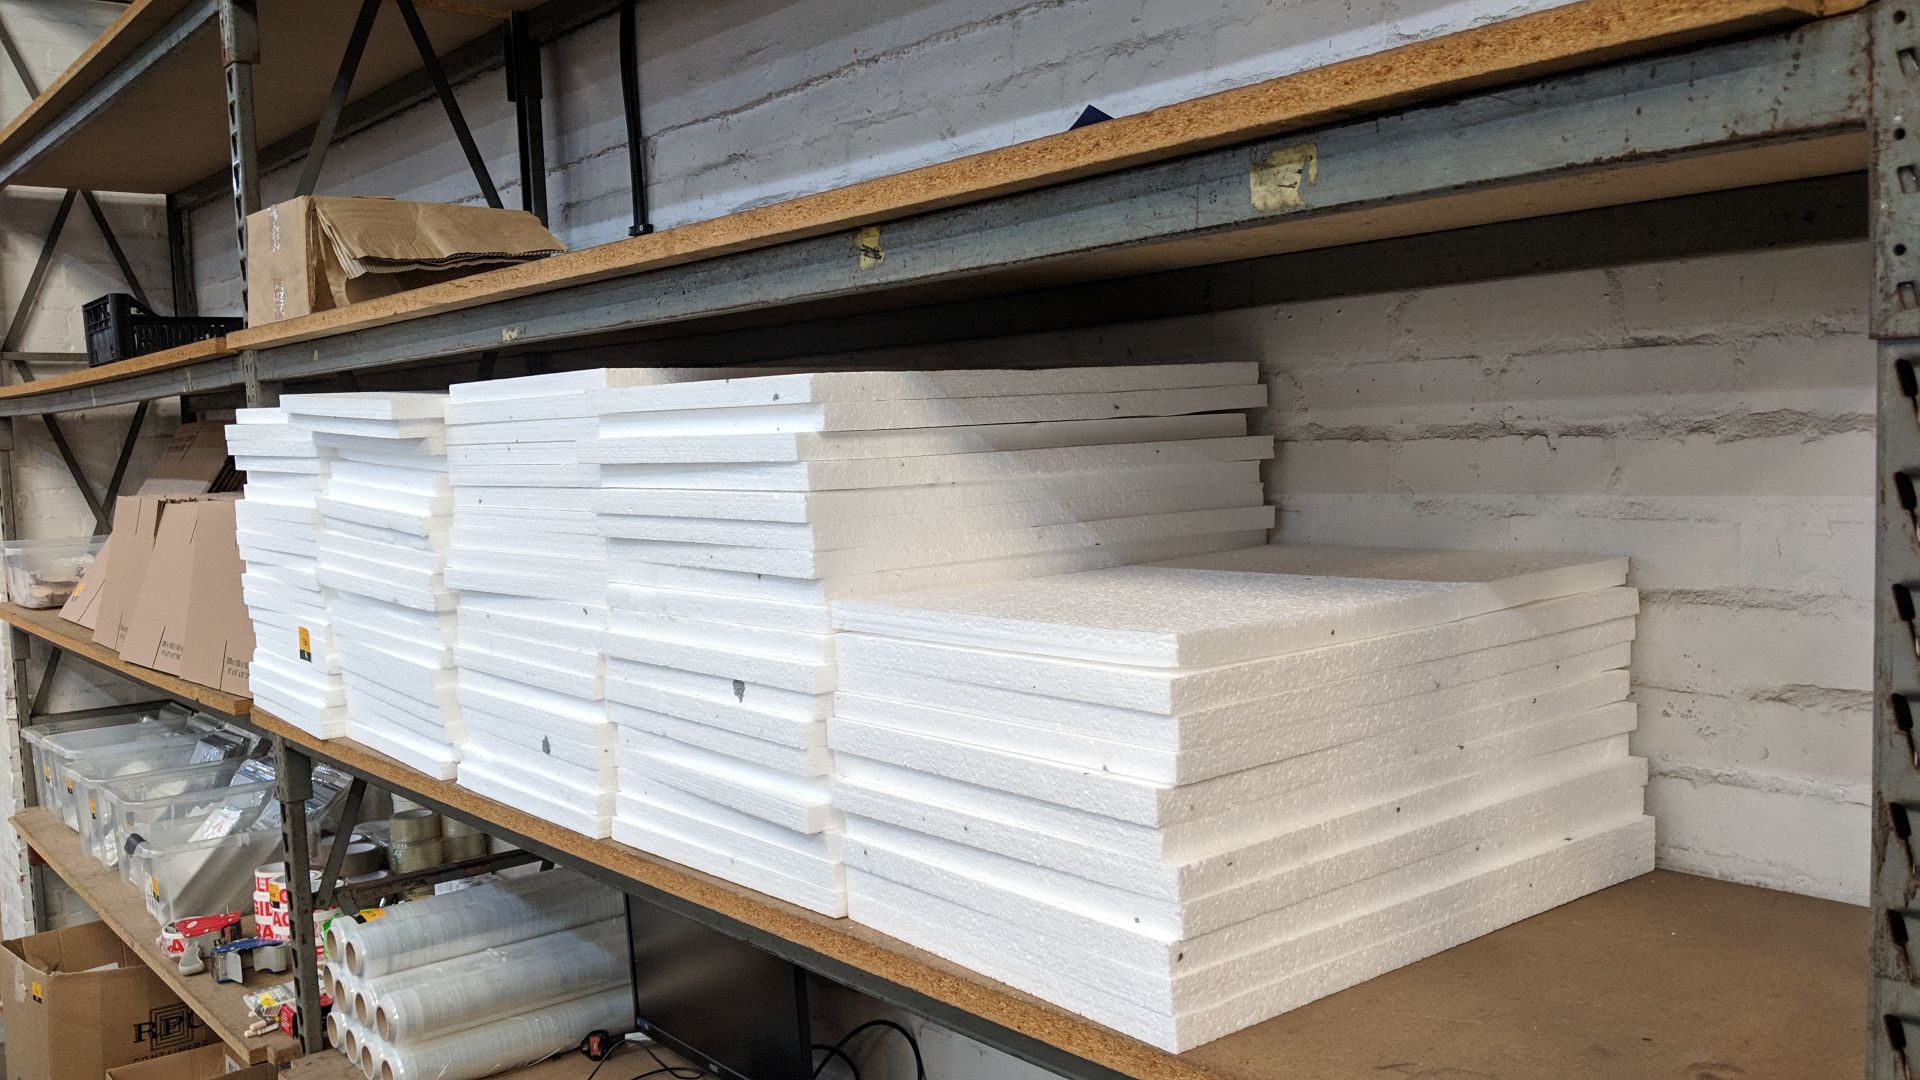 The contents of a bay of polystyrene sheets, in 5 stacks, each sheet measuring approximately 600mm x